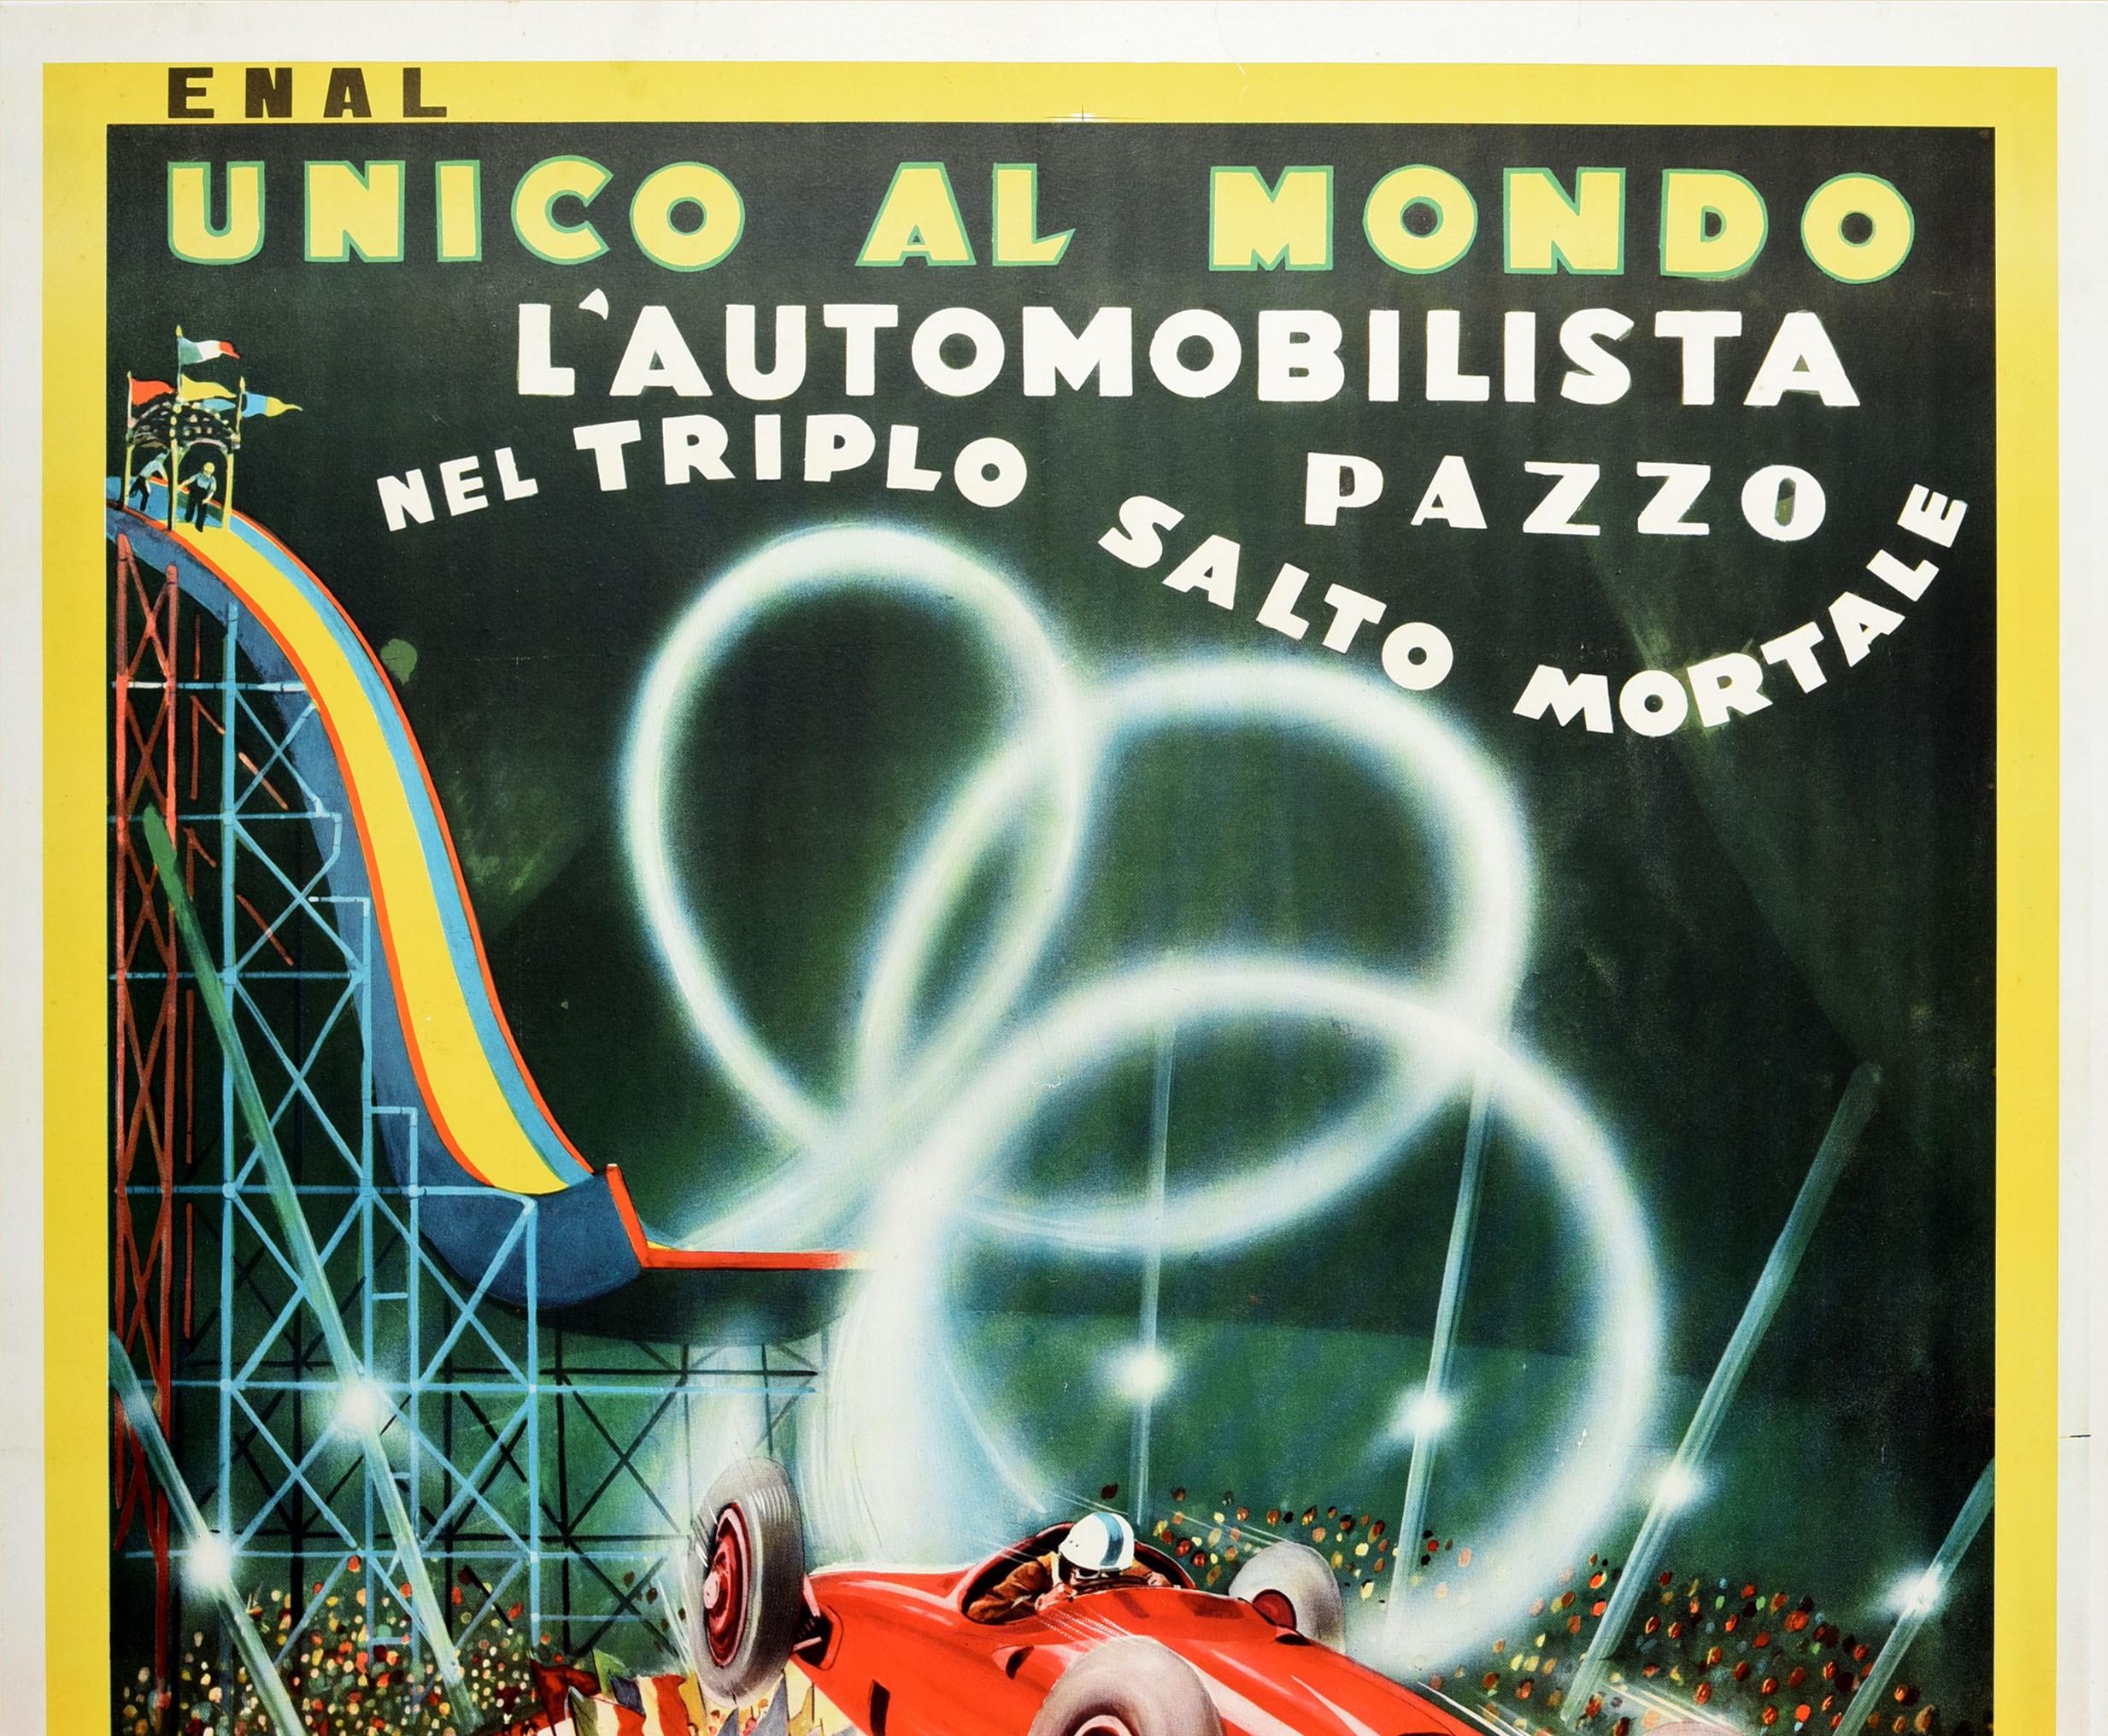 Original Vintage Poster Italy Circus Queen Moira Orfei Triple Somersault Car Act - Print by Unknown